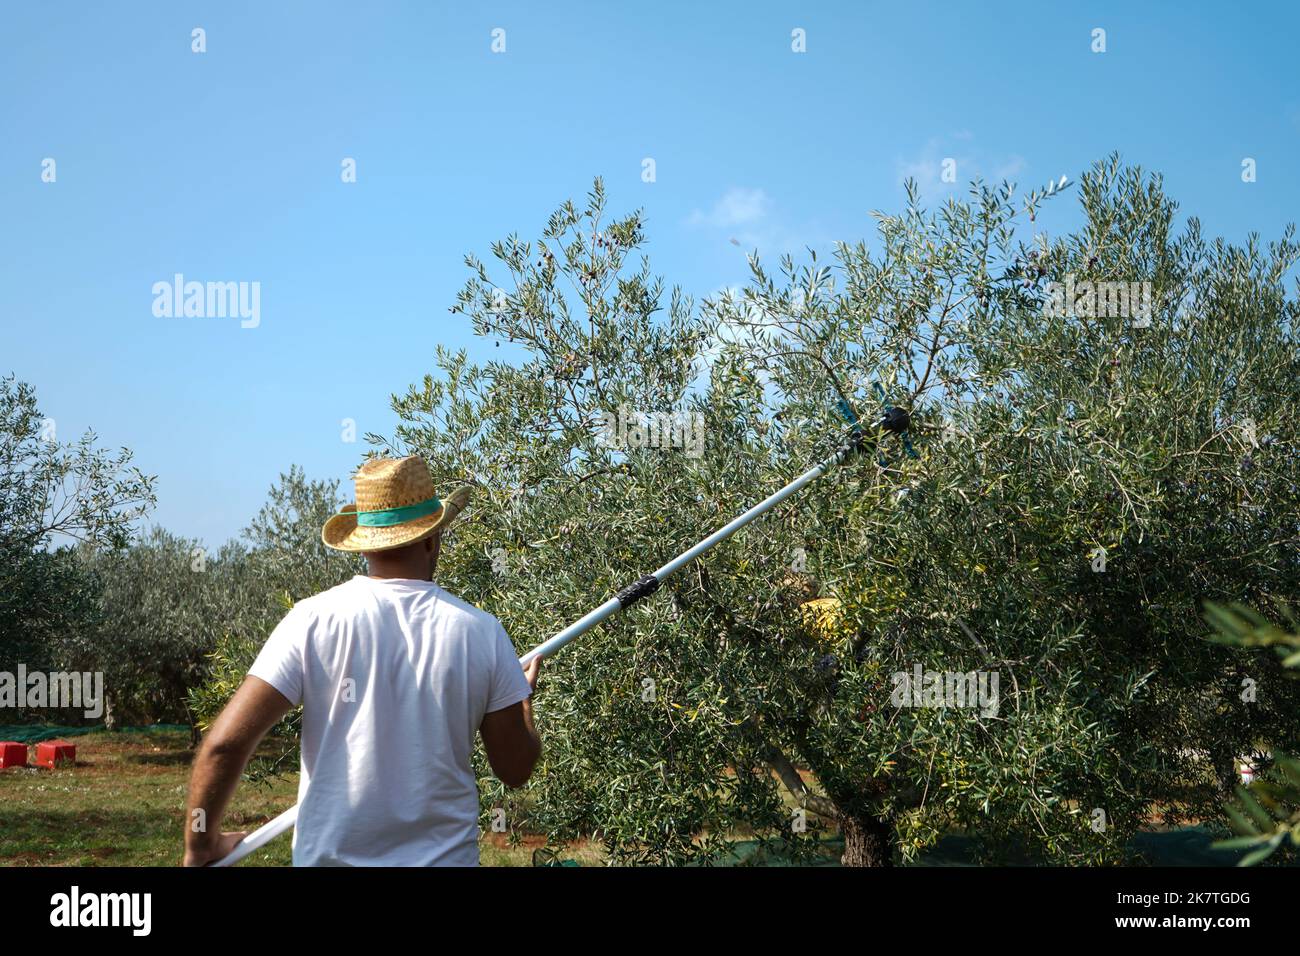 Olive harvest season: farmer harvesting olives with picking machine (olive shaker) in olive grove for olive oil production on sunny day Stock Photo